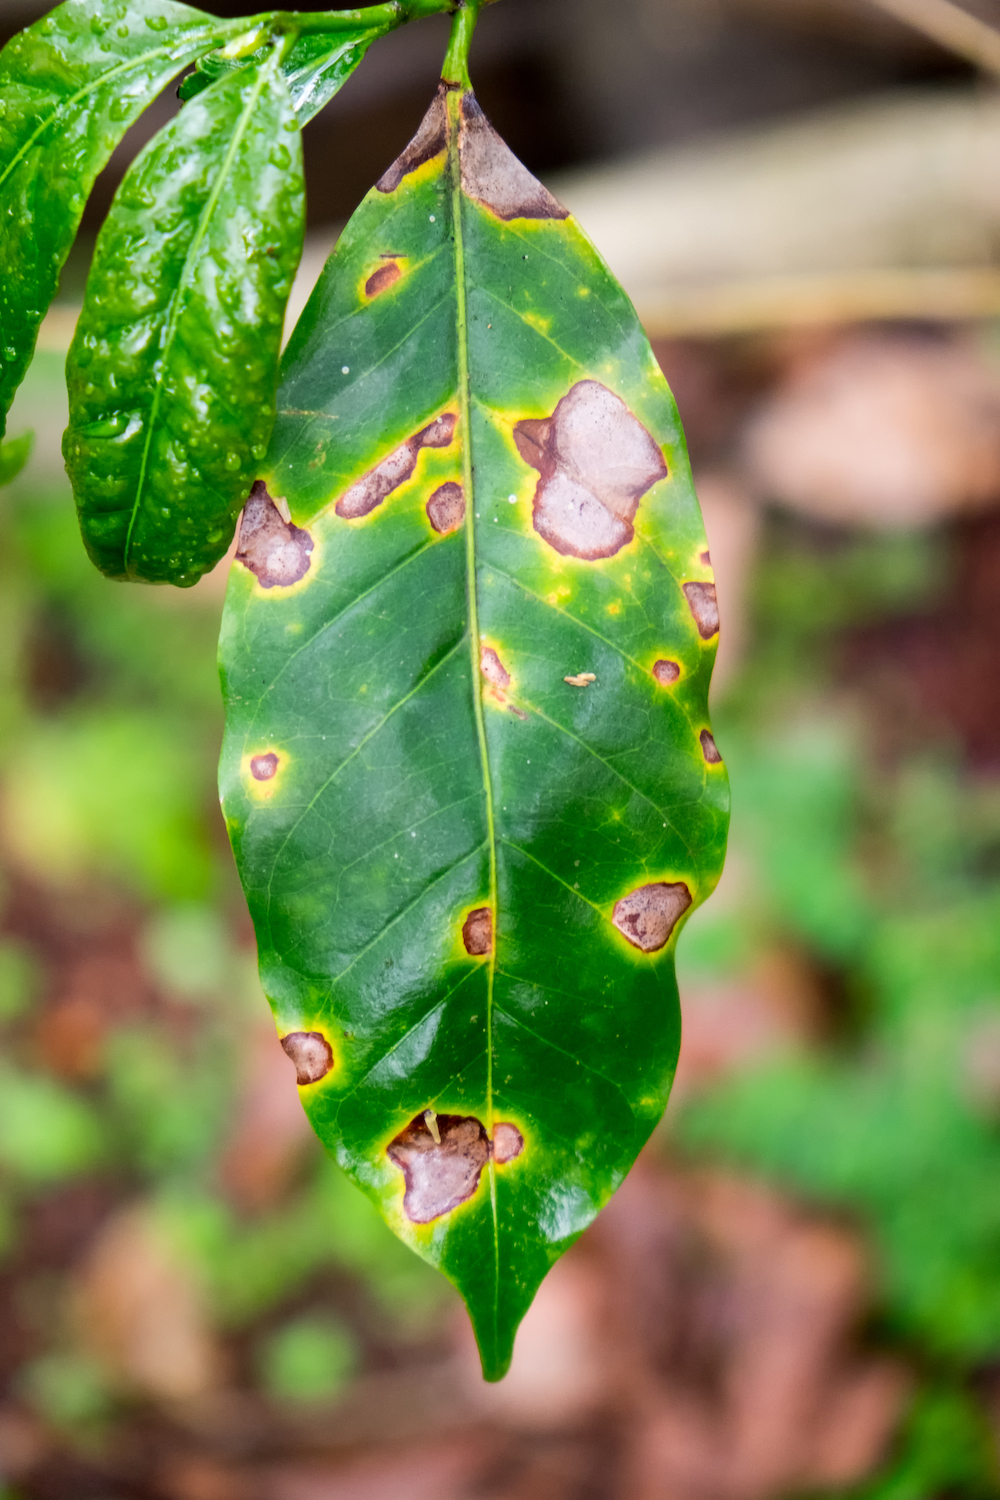 A coffee leaf with brown spots